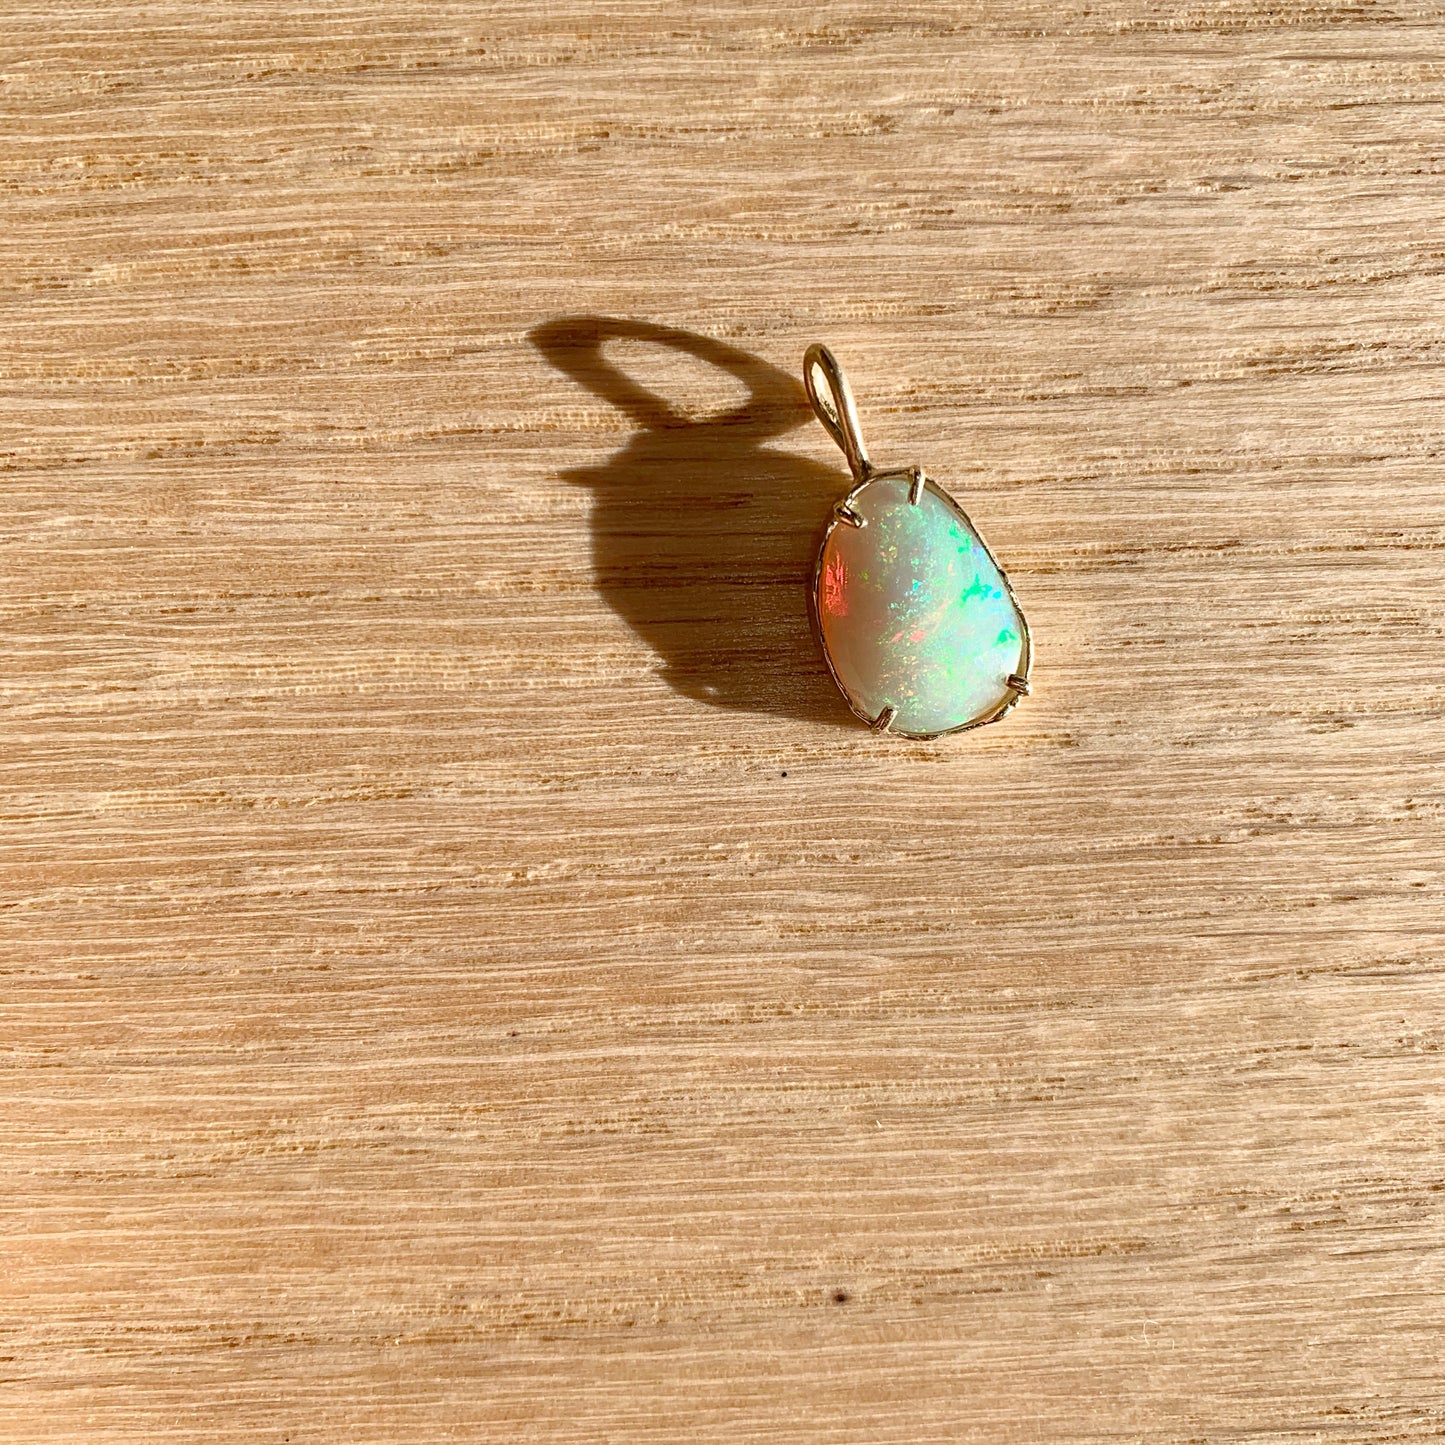 Opal Pendant with organic texture in 14k gold